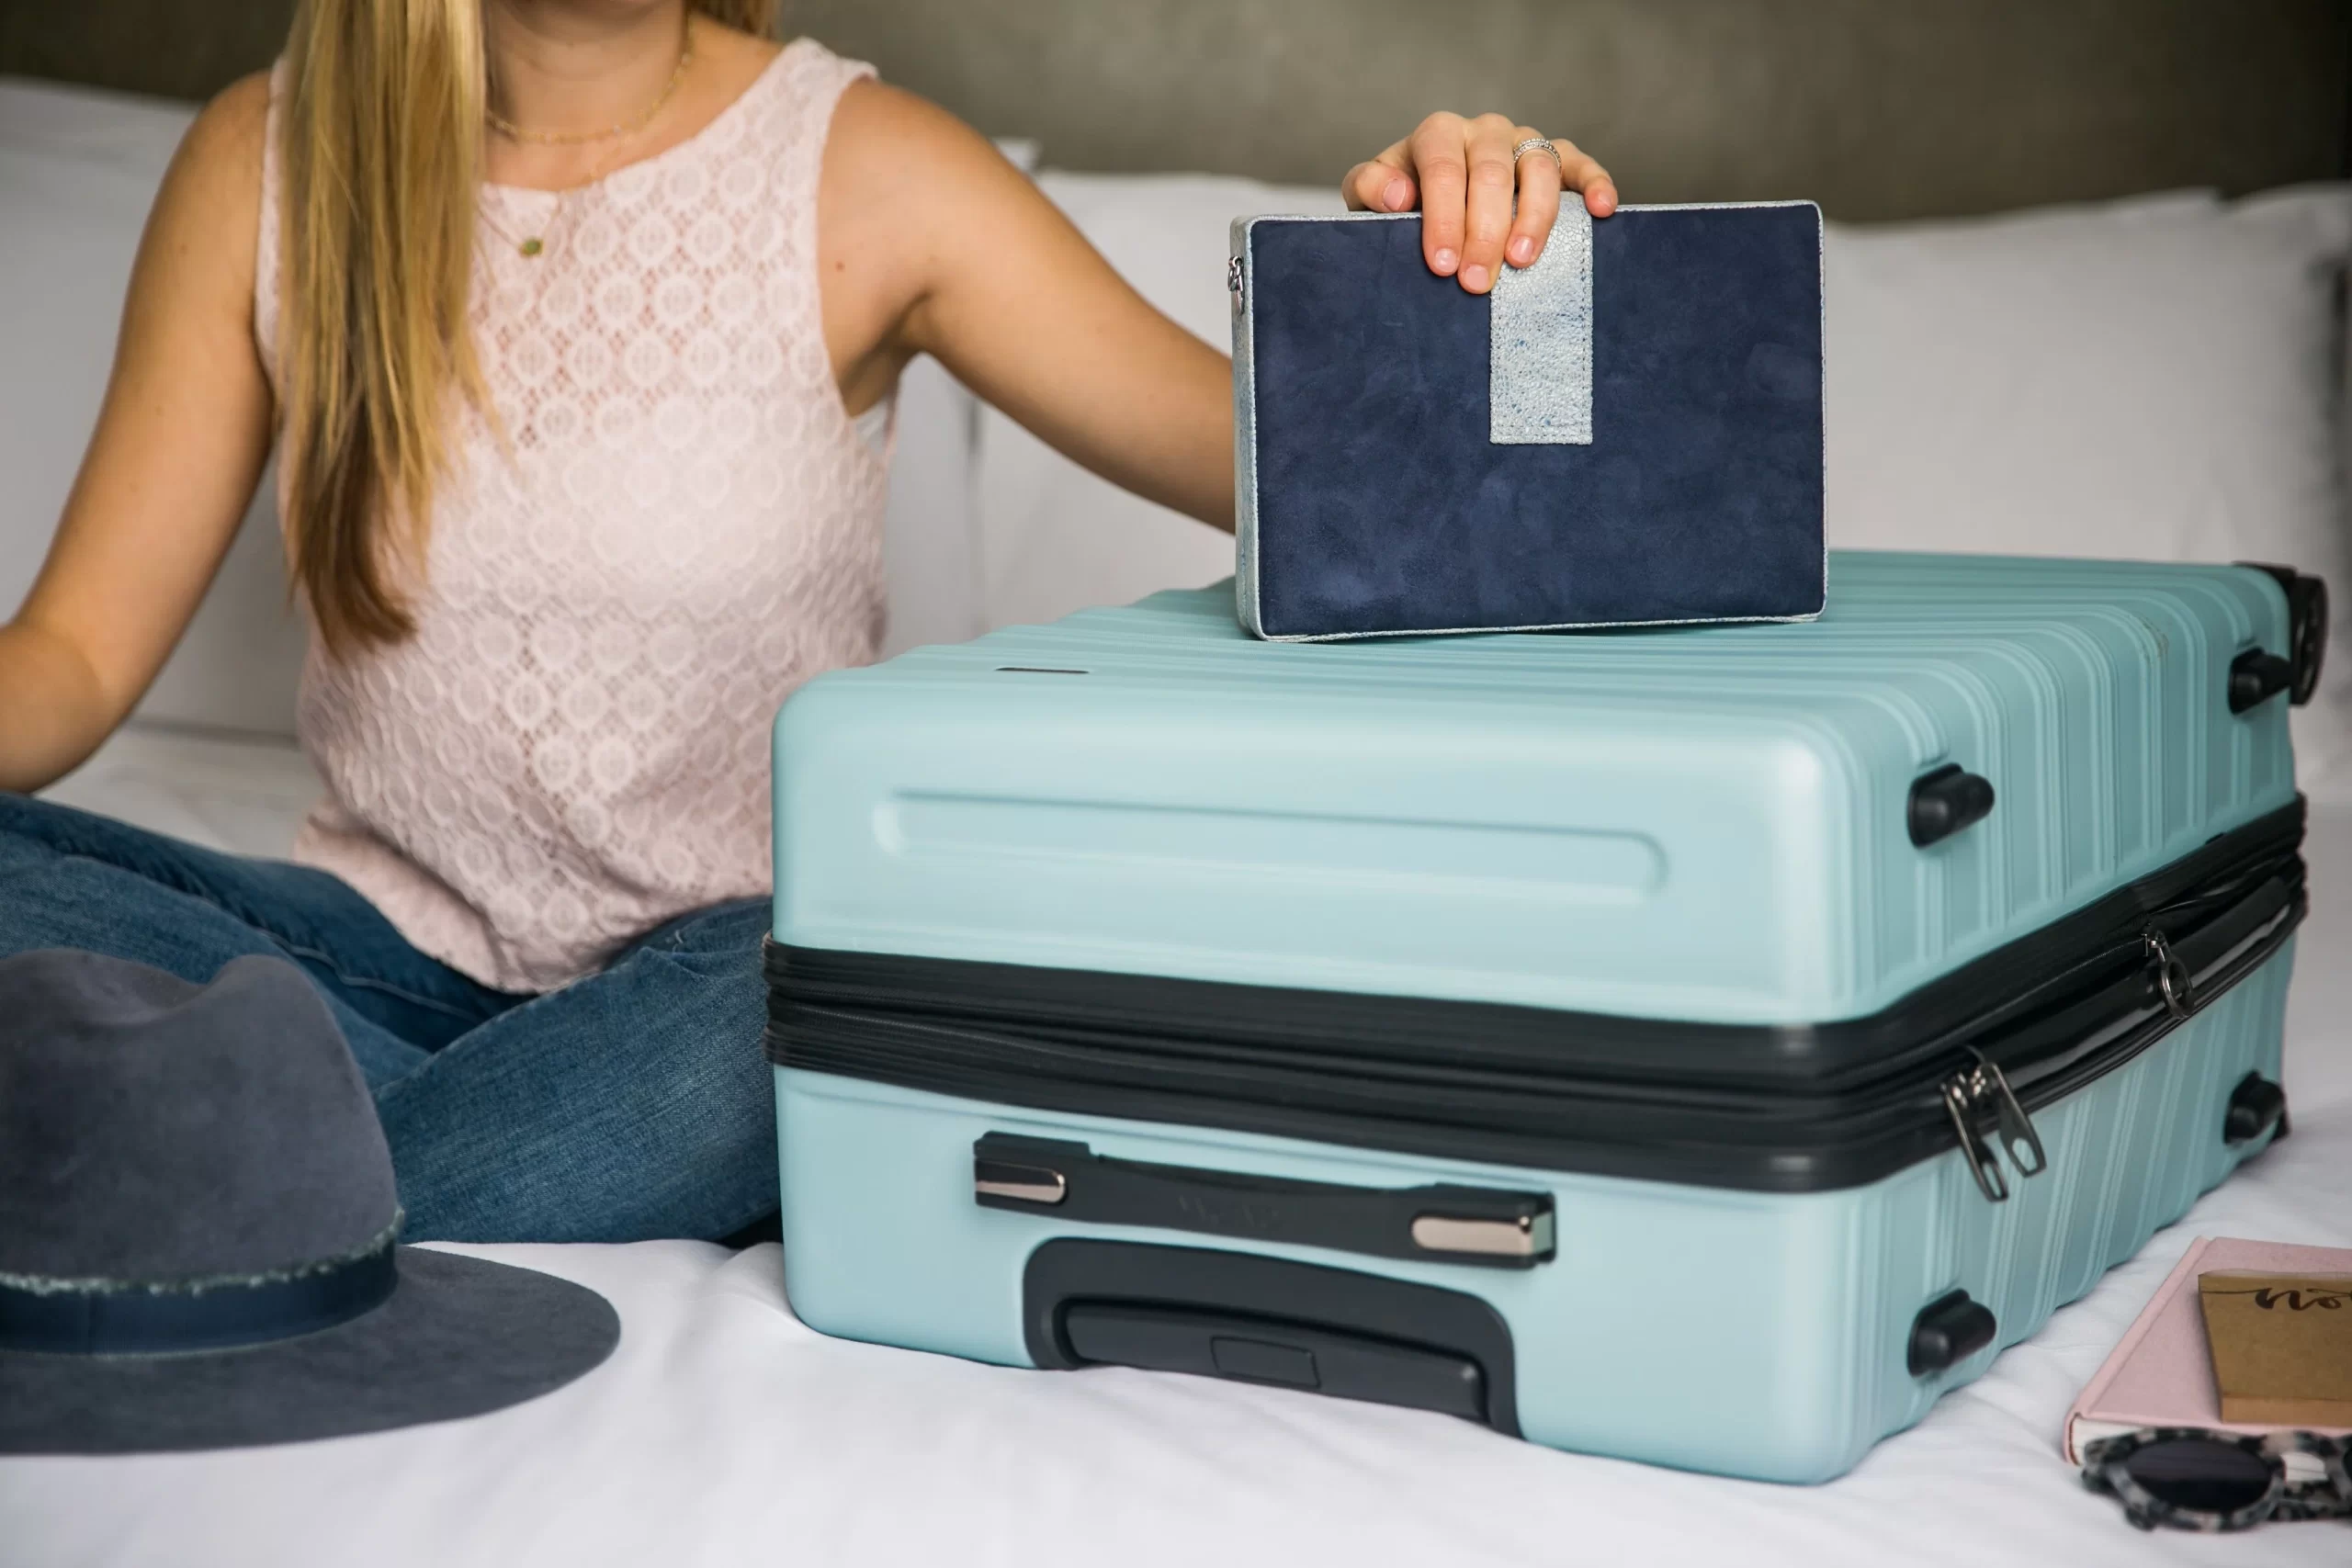 Baggage Bling: Making a Statement with Unique Suitcases